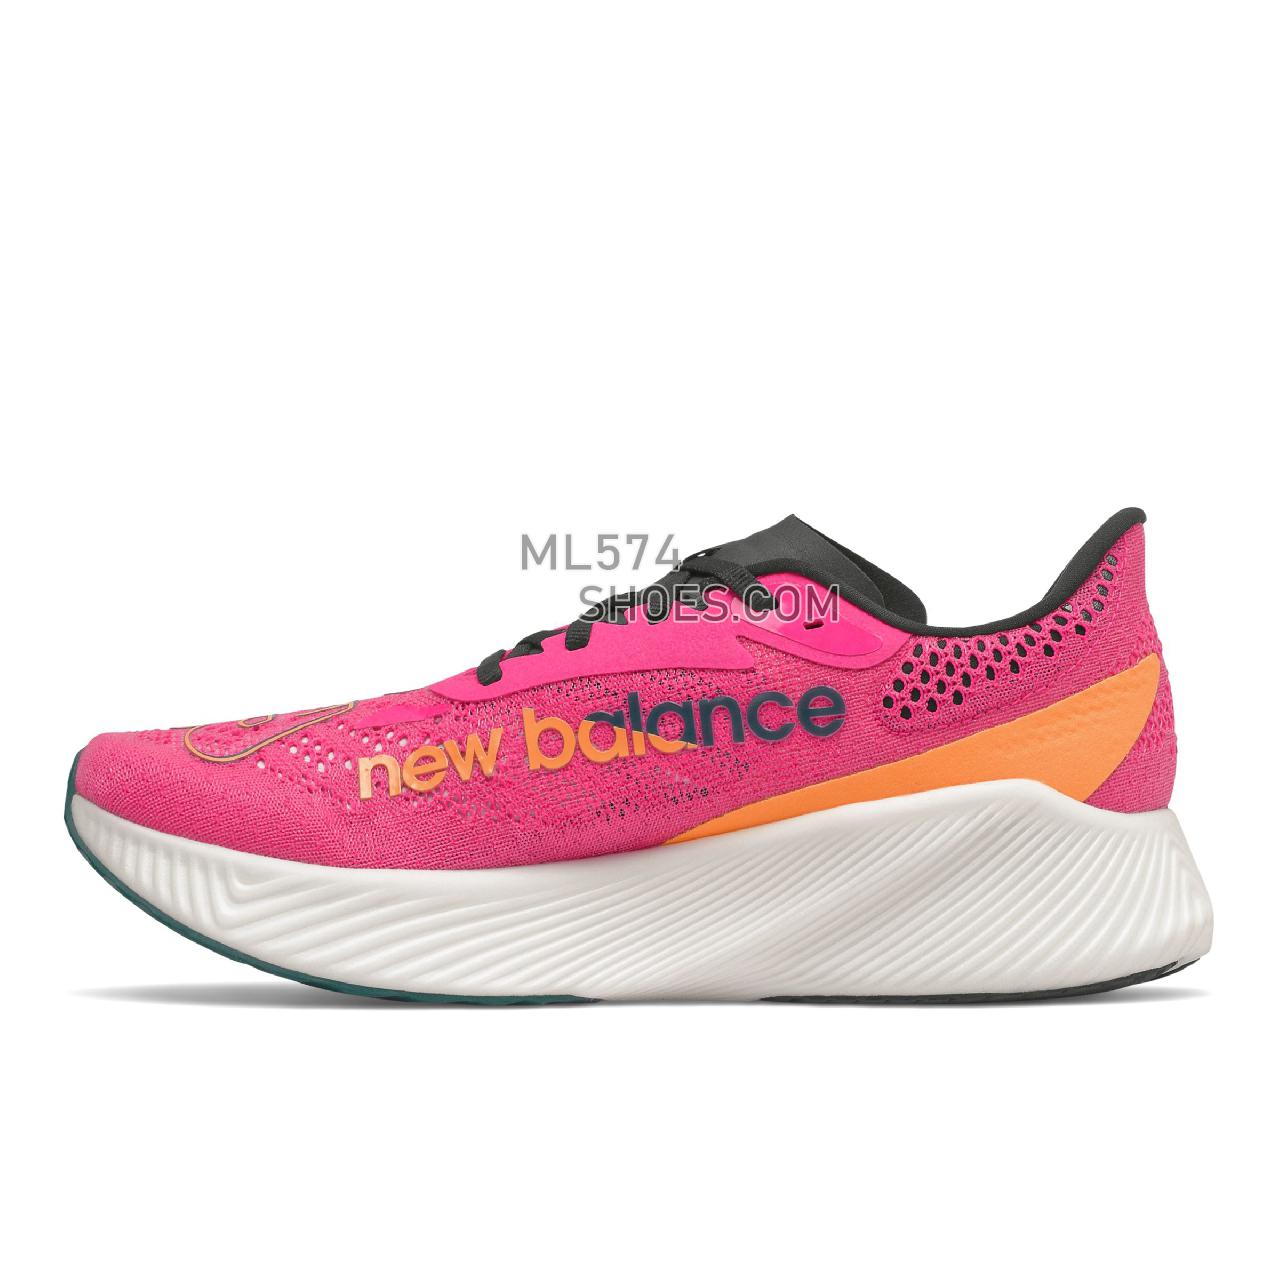 New Balance FuelCell RC Elite v2 - Men's Competition Running - Pink Glo with Black - MRCELPB2